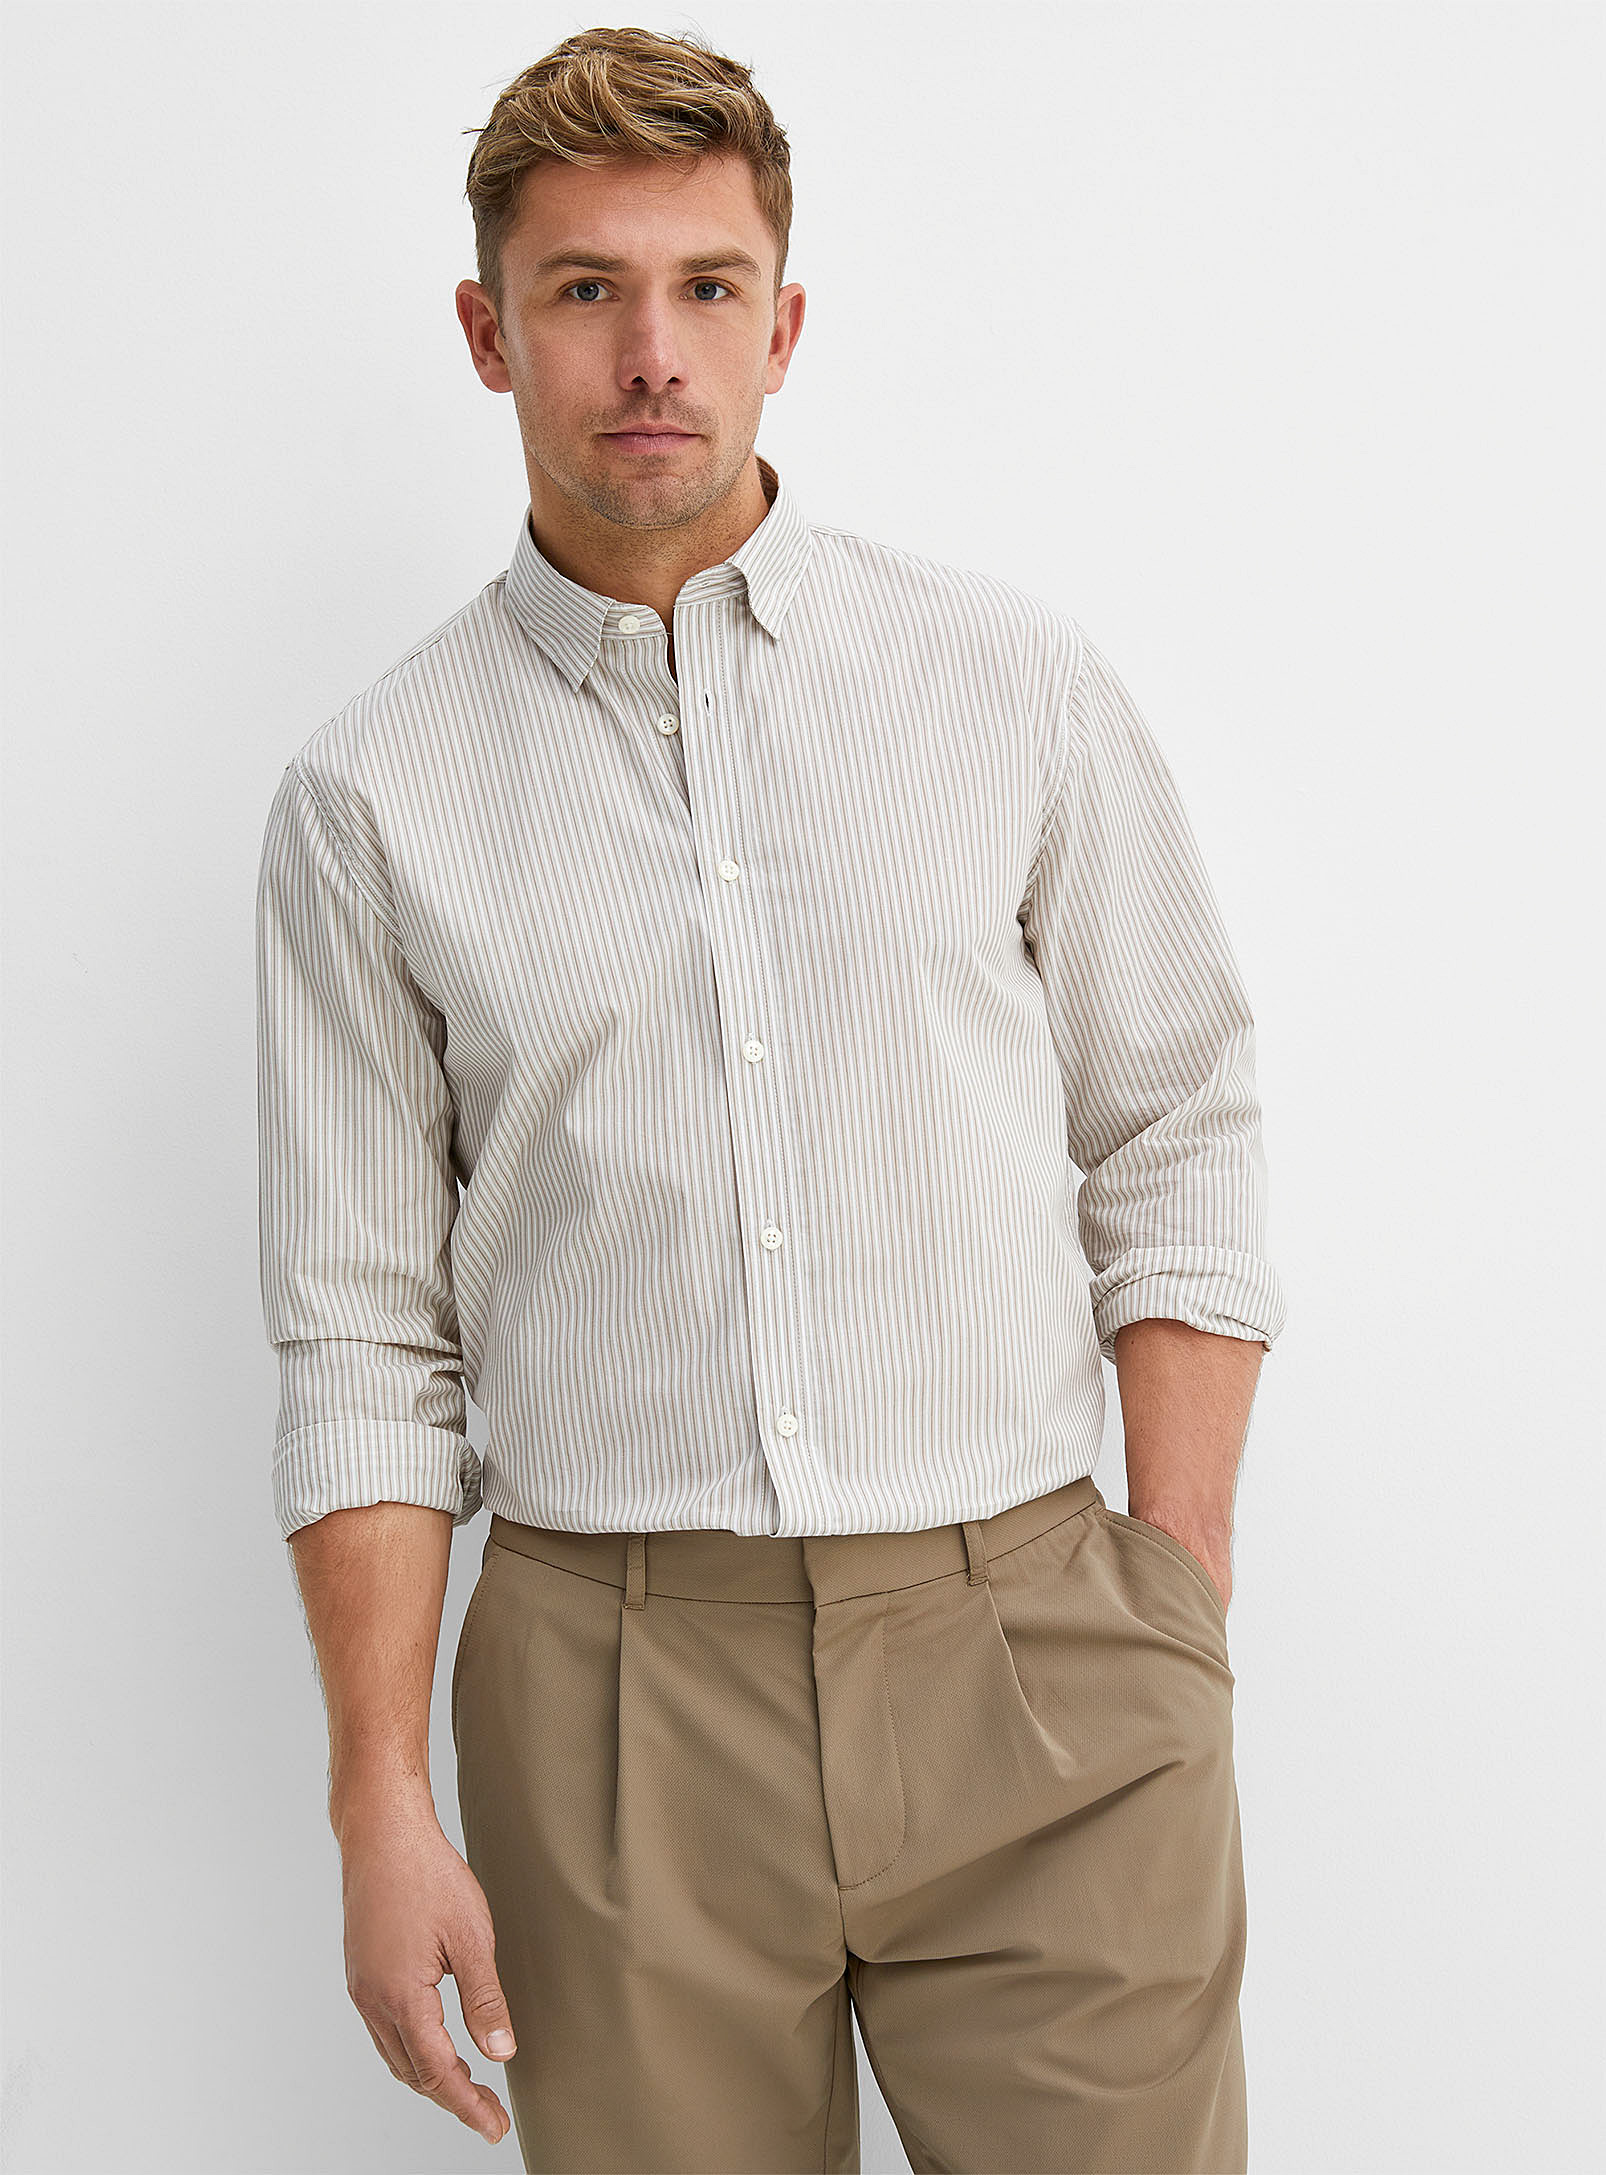 Matinique Natural Stripe Shirt In Patterned Brown